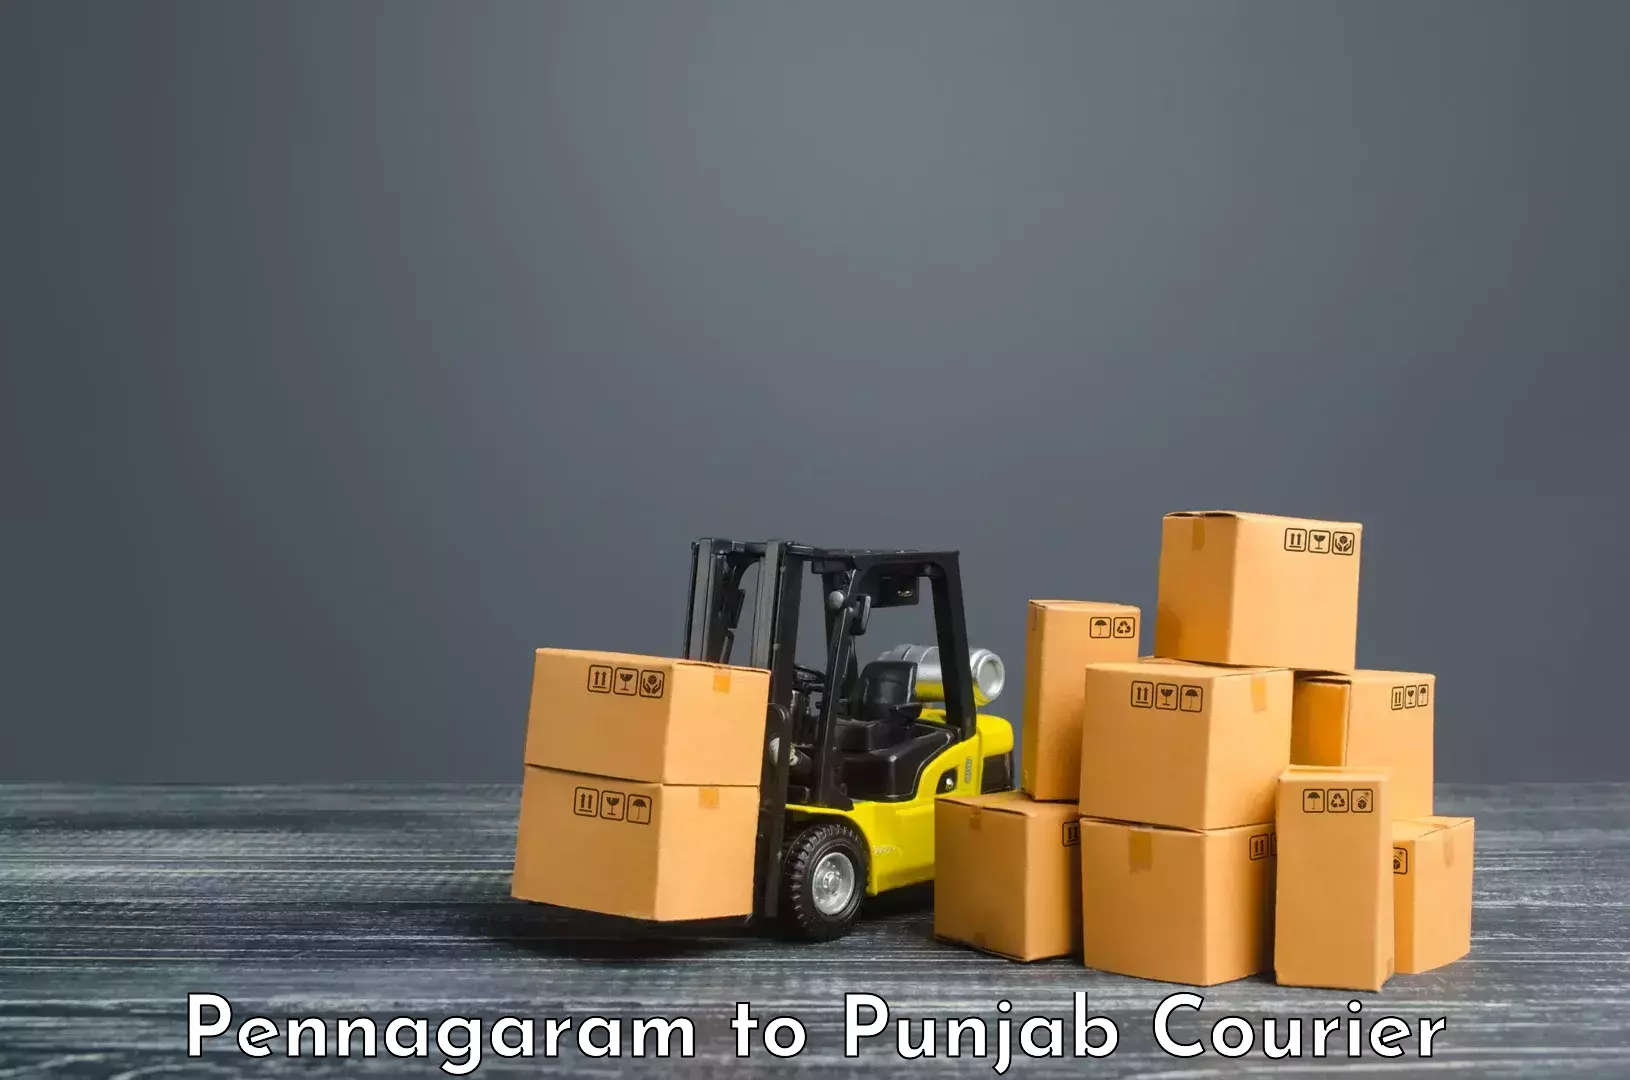 Same-day delivery solutions Pennagaram to Nangal